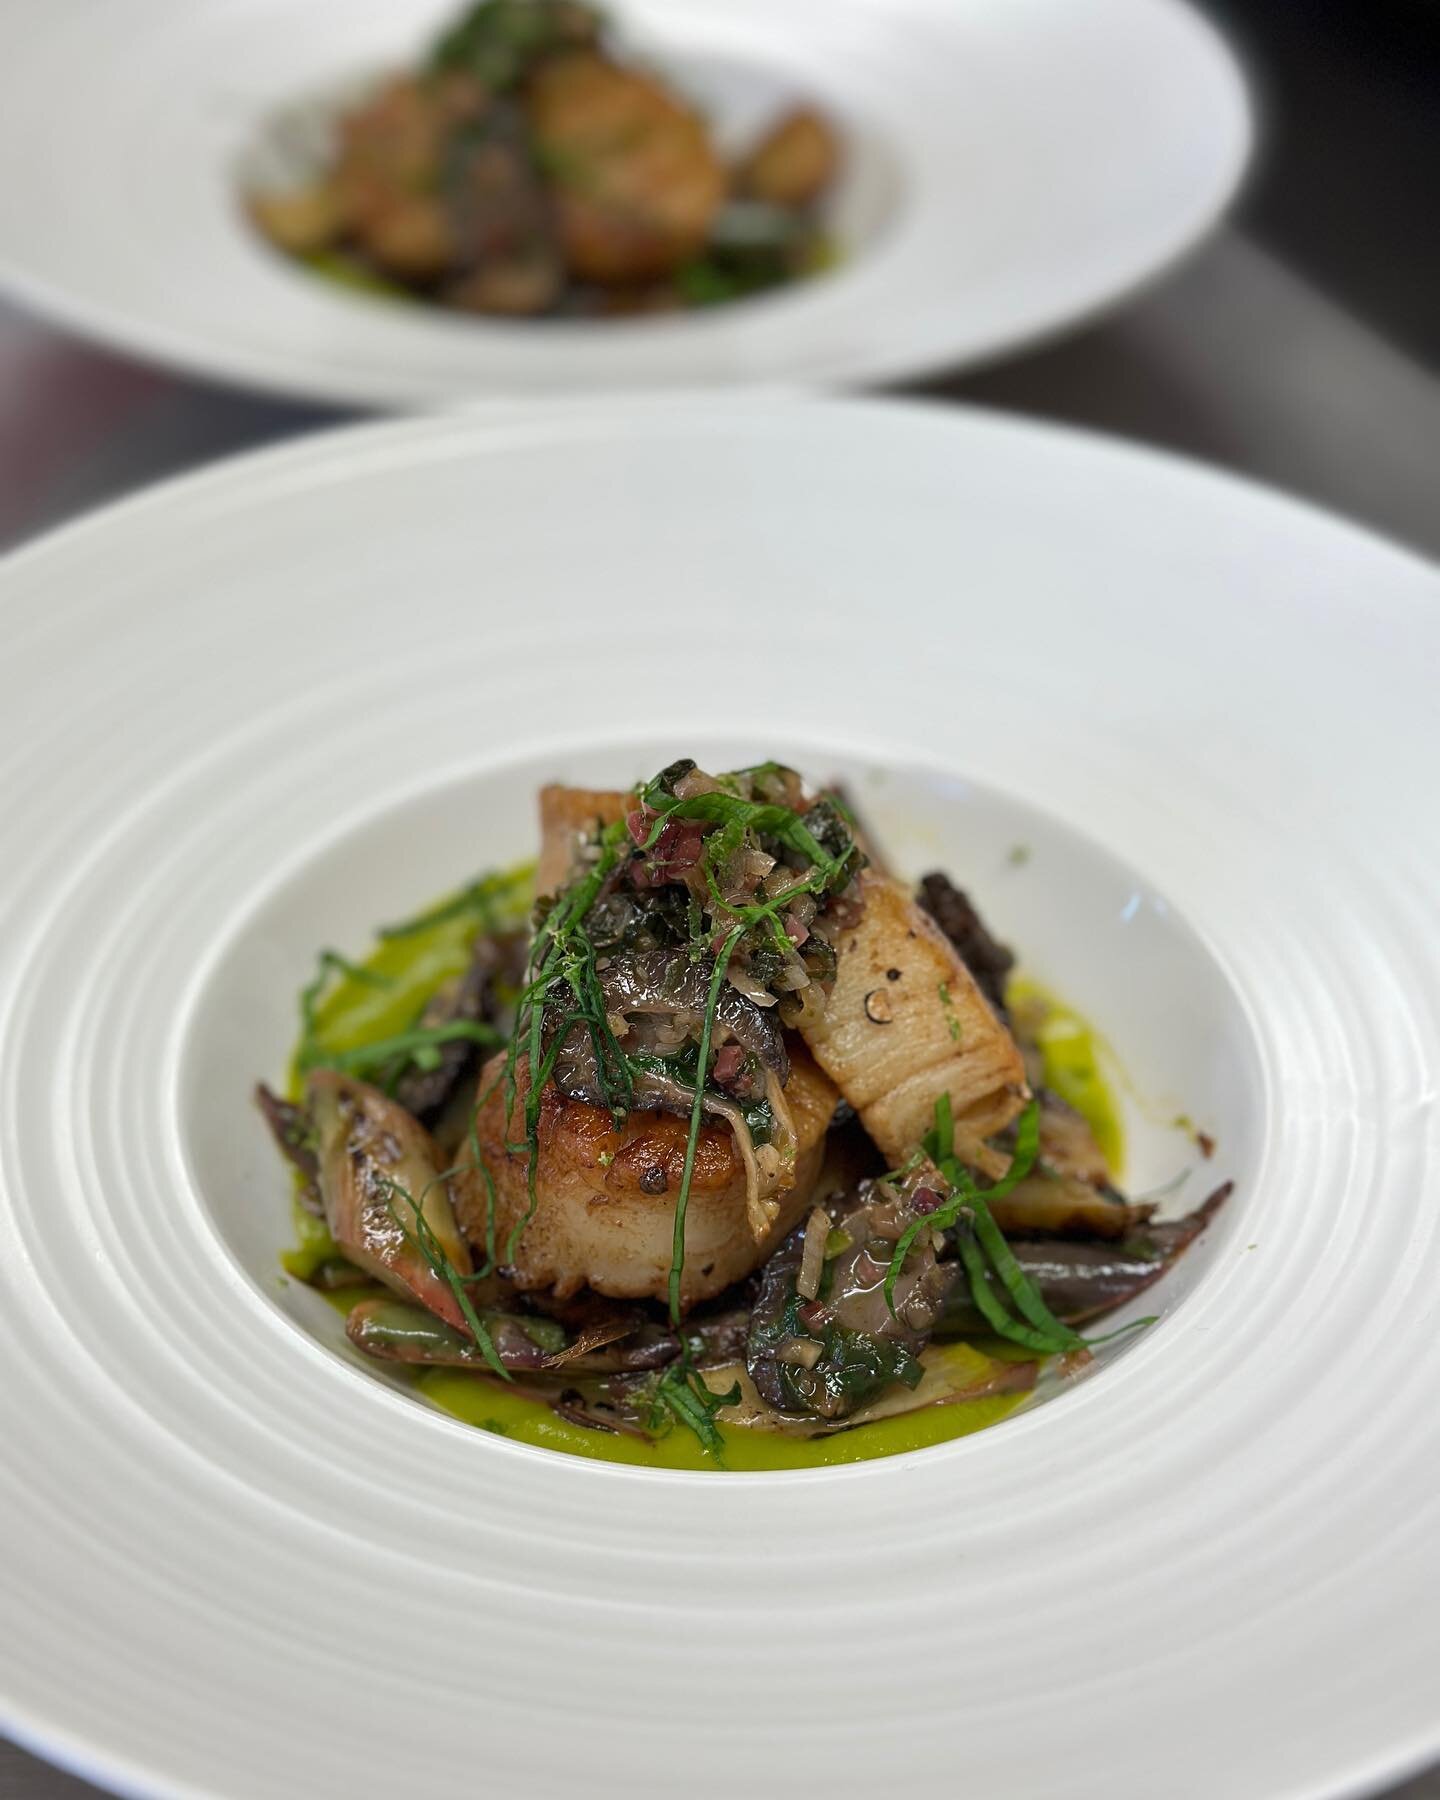 Salivating over this refreshing dish featuring all the best elements of Spring , including ramps, purple asparagus and morrels. Join us for our Coterie pop-up on May 20th for more spring focused dishes, you may even receive an amuse bouche version of